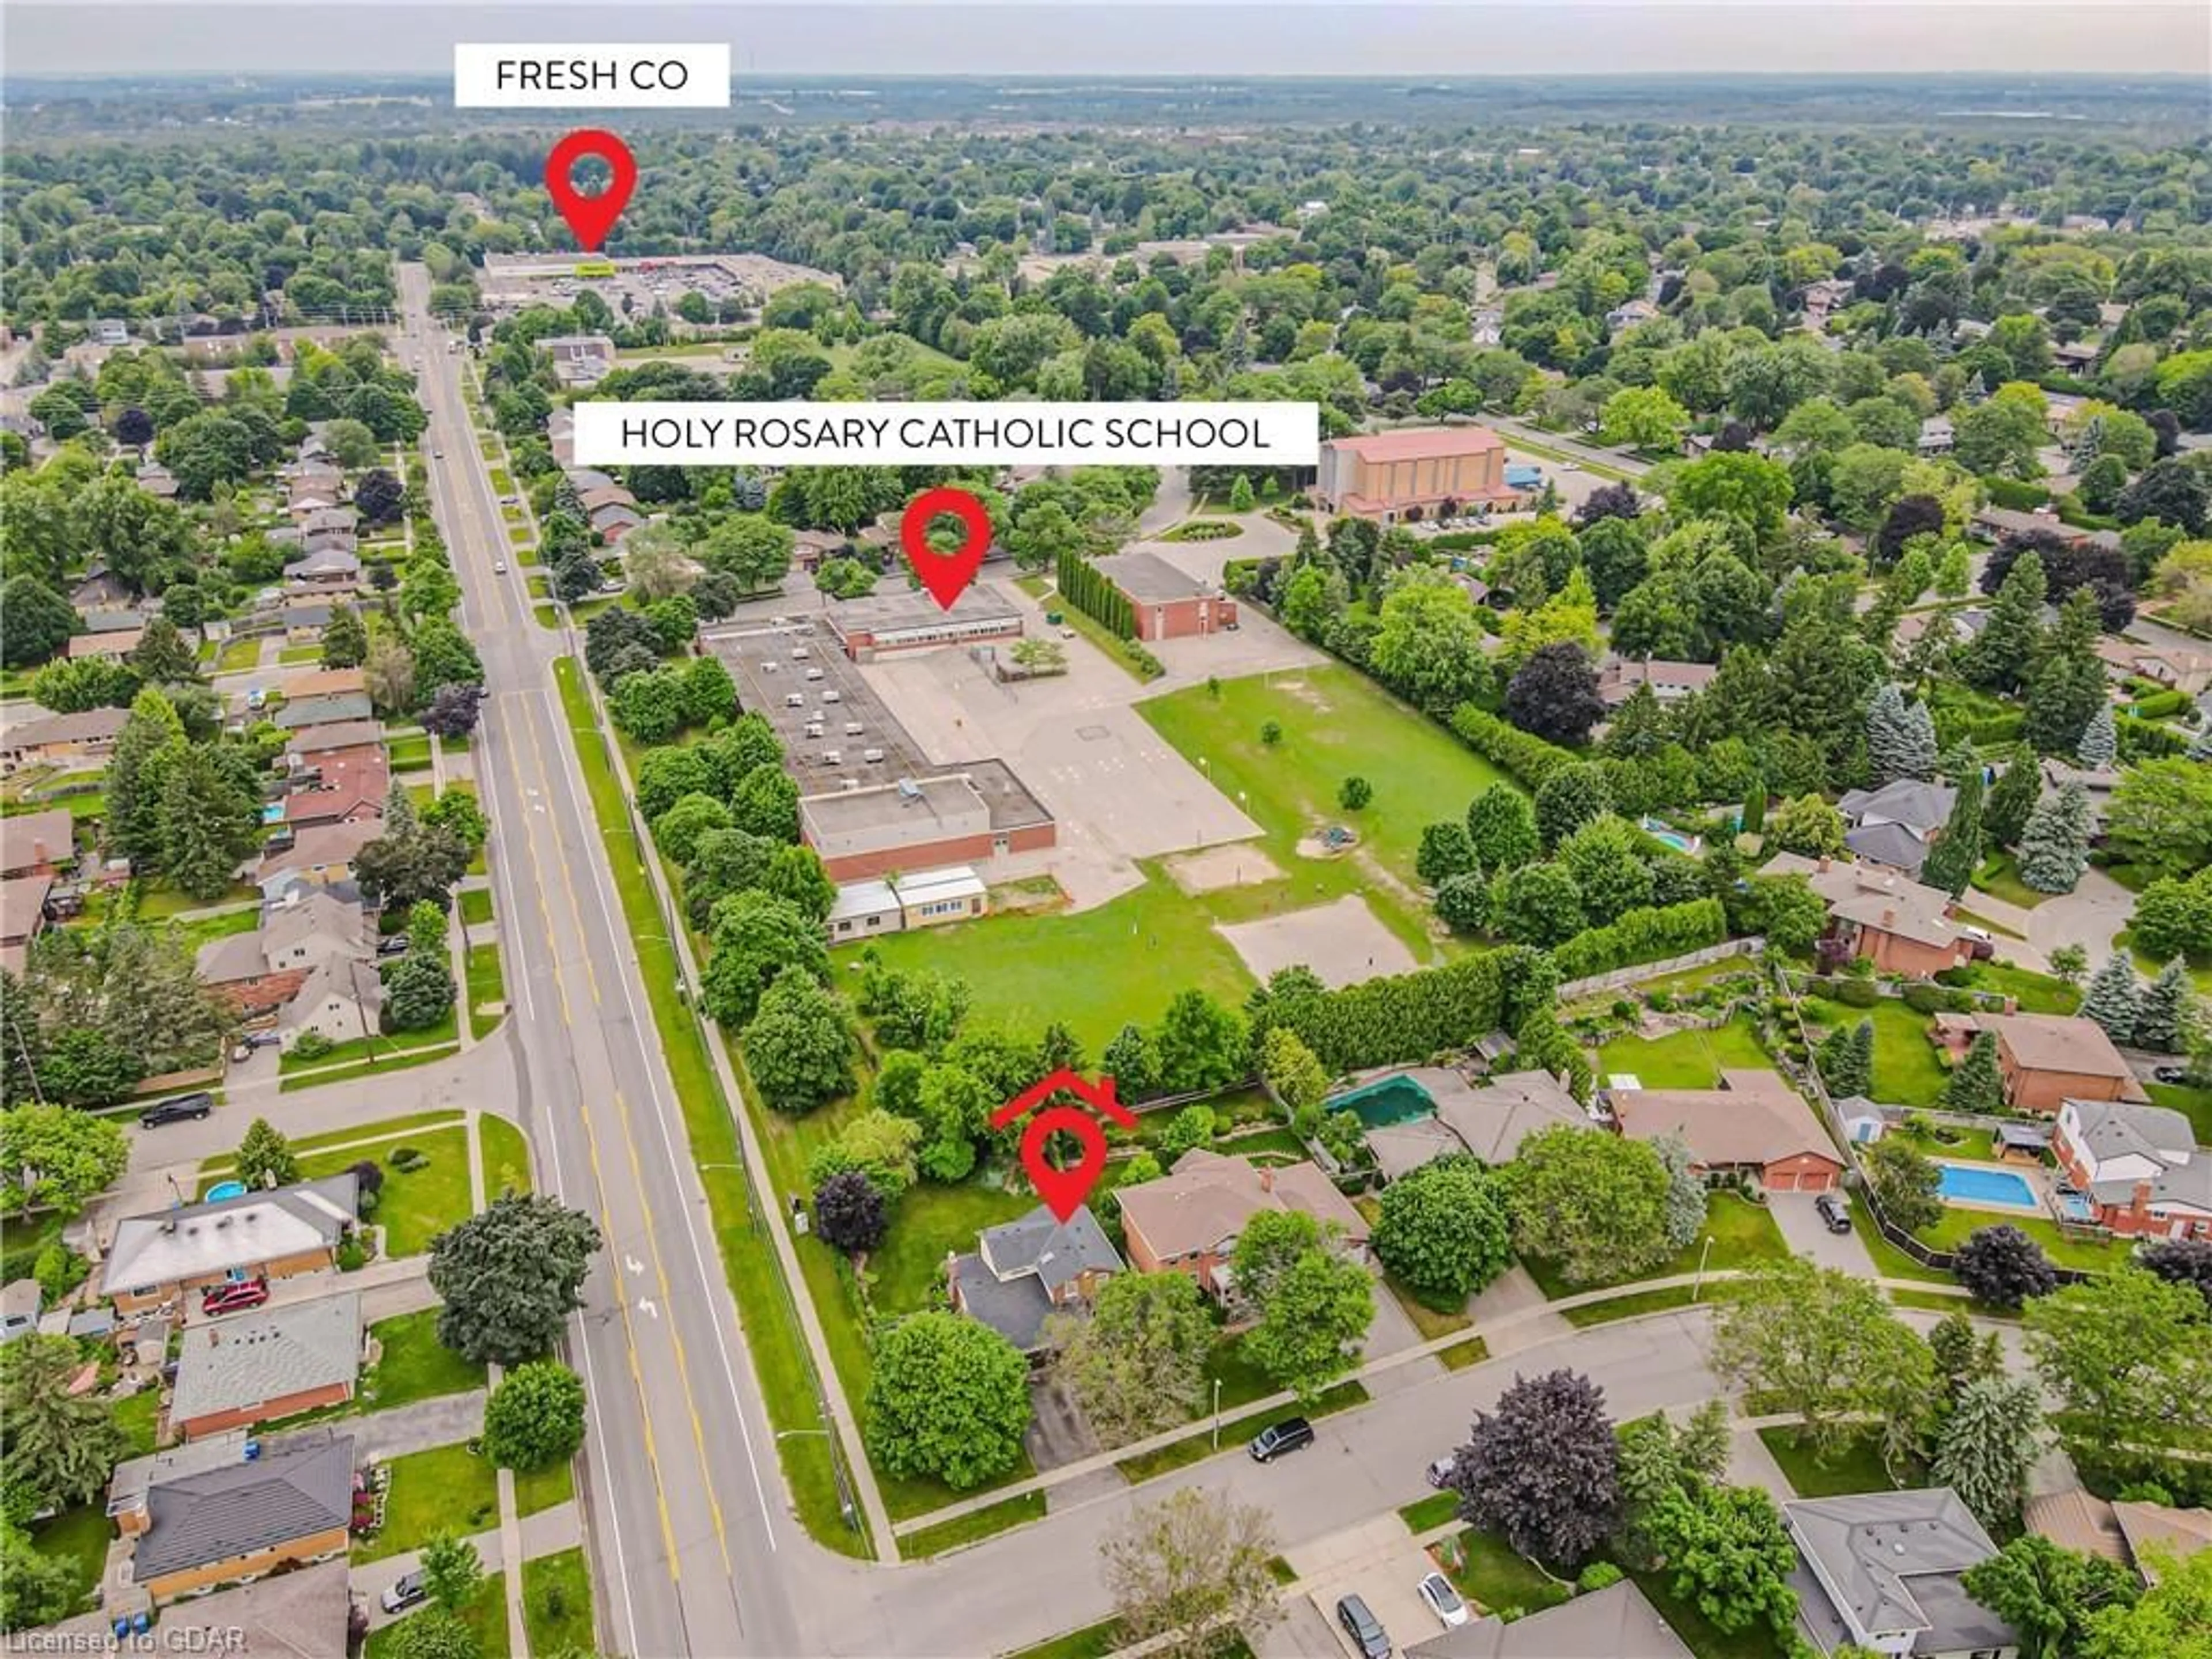 Street view for 2 Walnut Dr, Guelph Ontario N1E 6R8